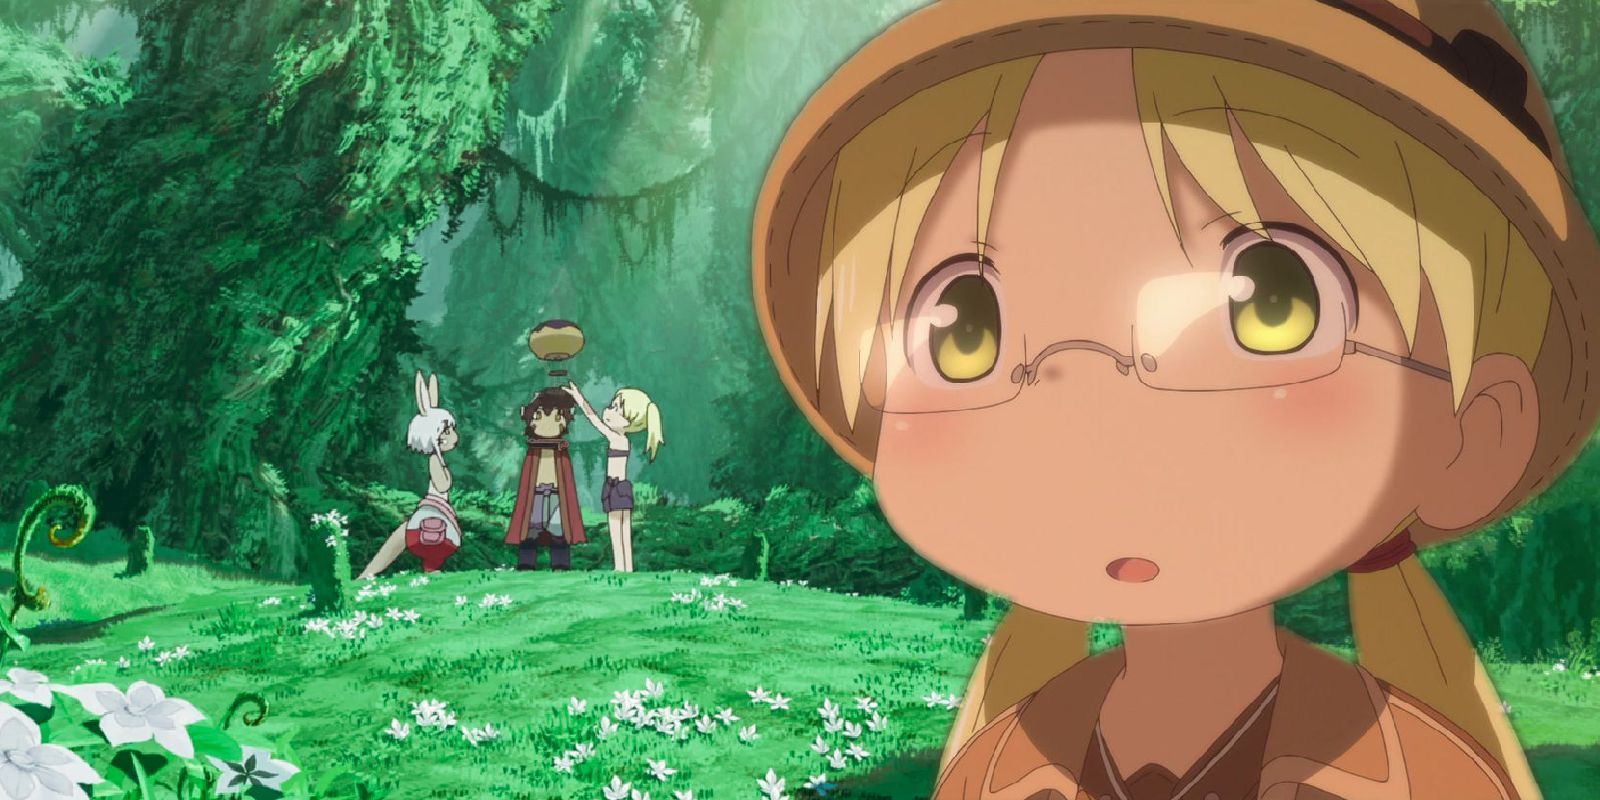 Riko looking upset in Made in Abyss anime